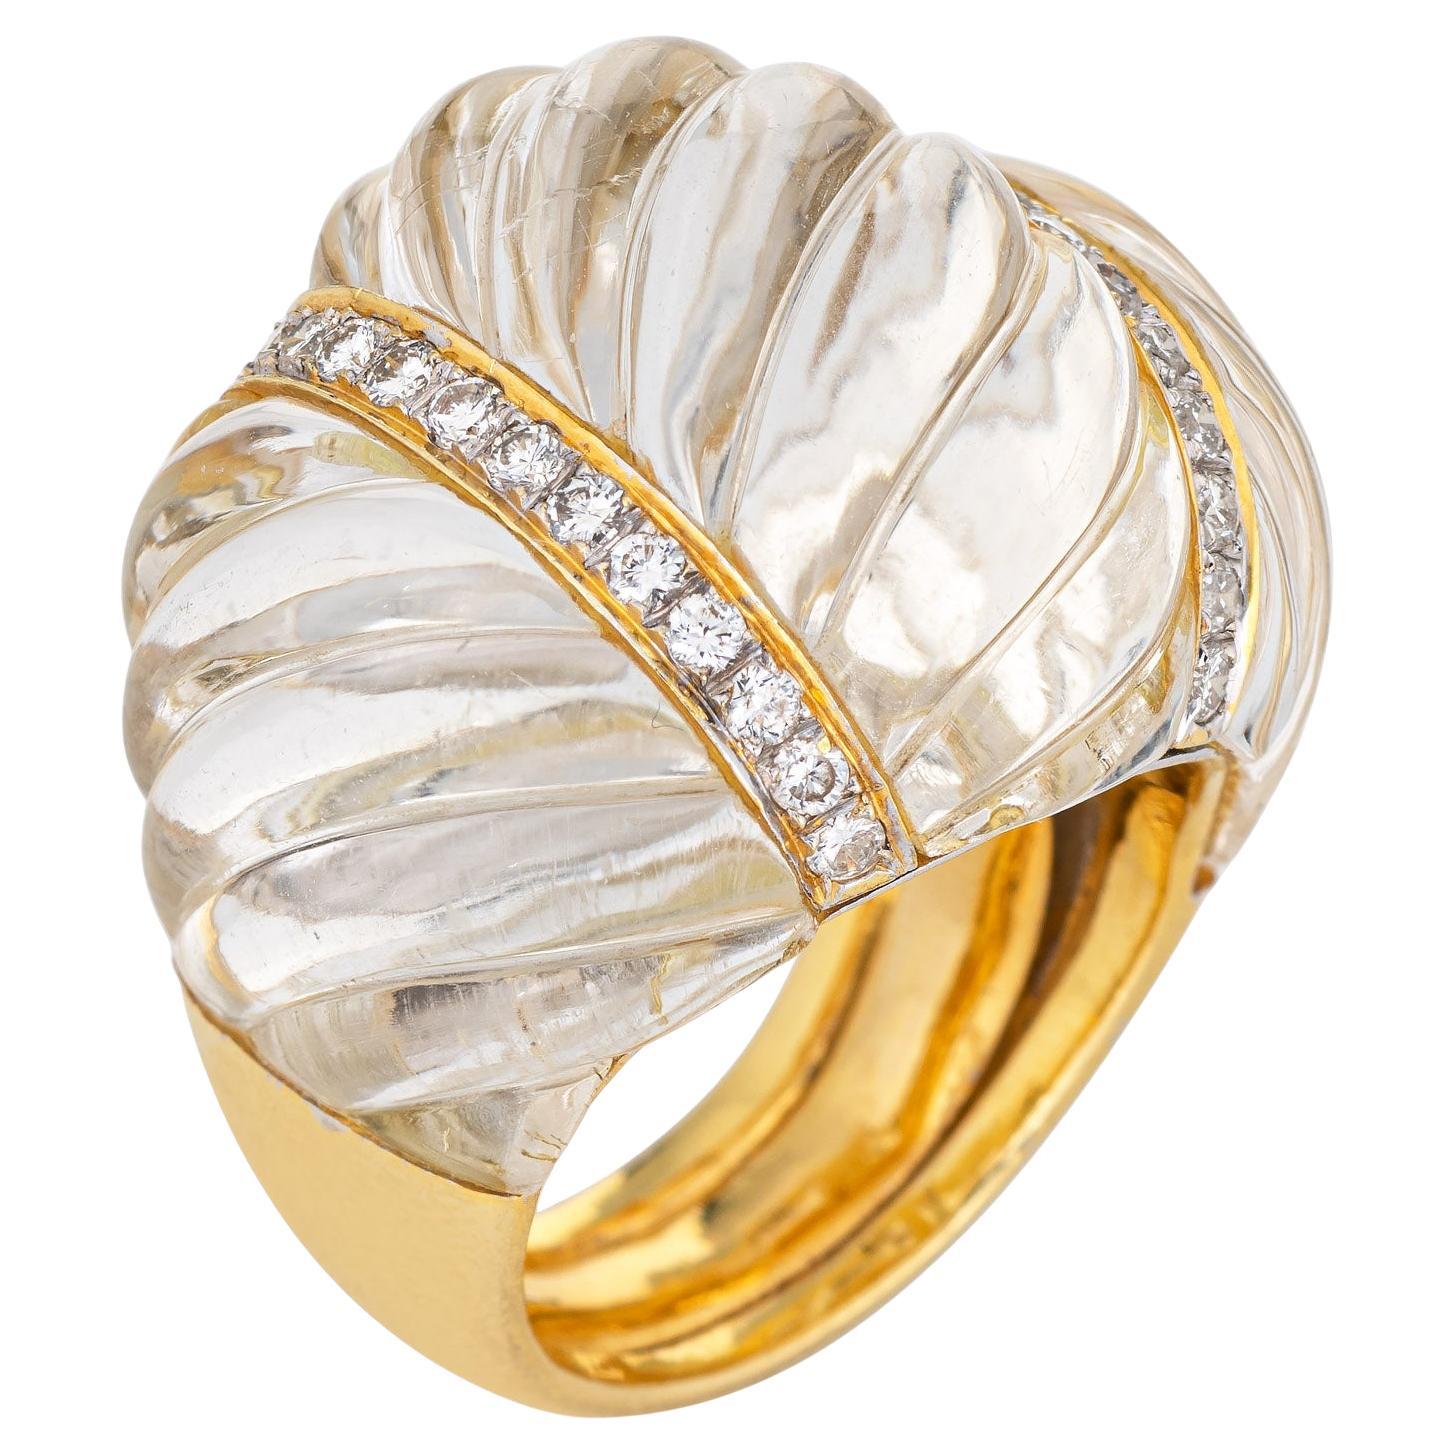 Fluted Rock Crystal Diamond Ring Dome Cocktail Vintage 18k Gold Jewelry Sz 7 For Sale